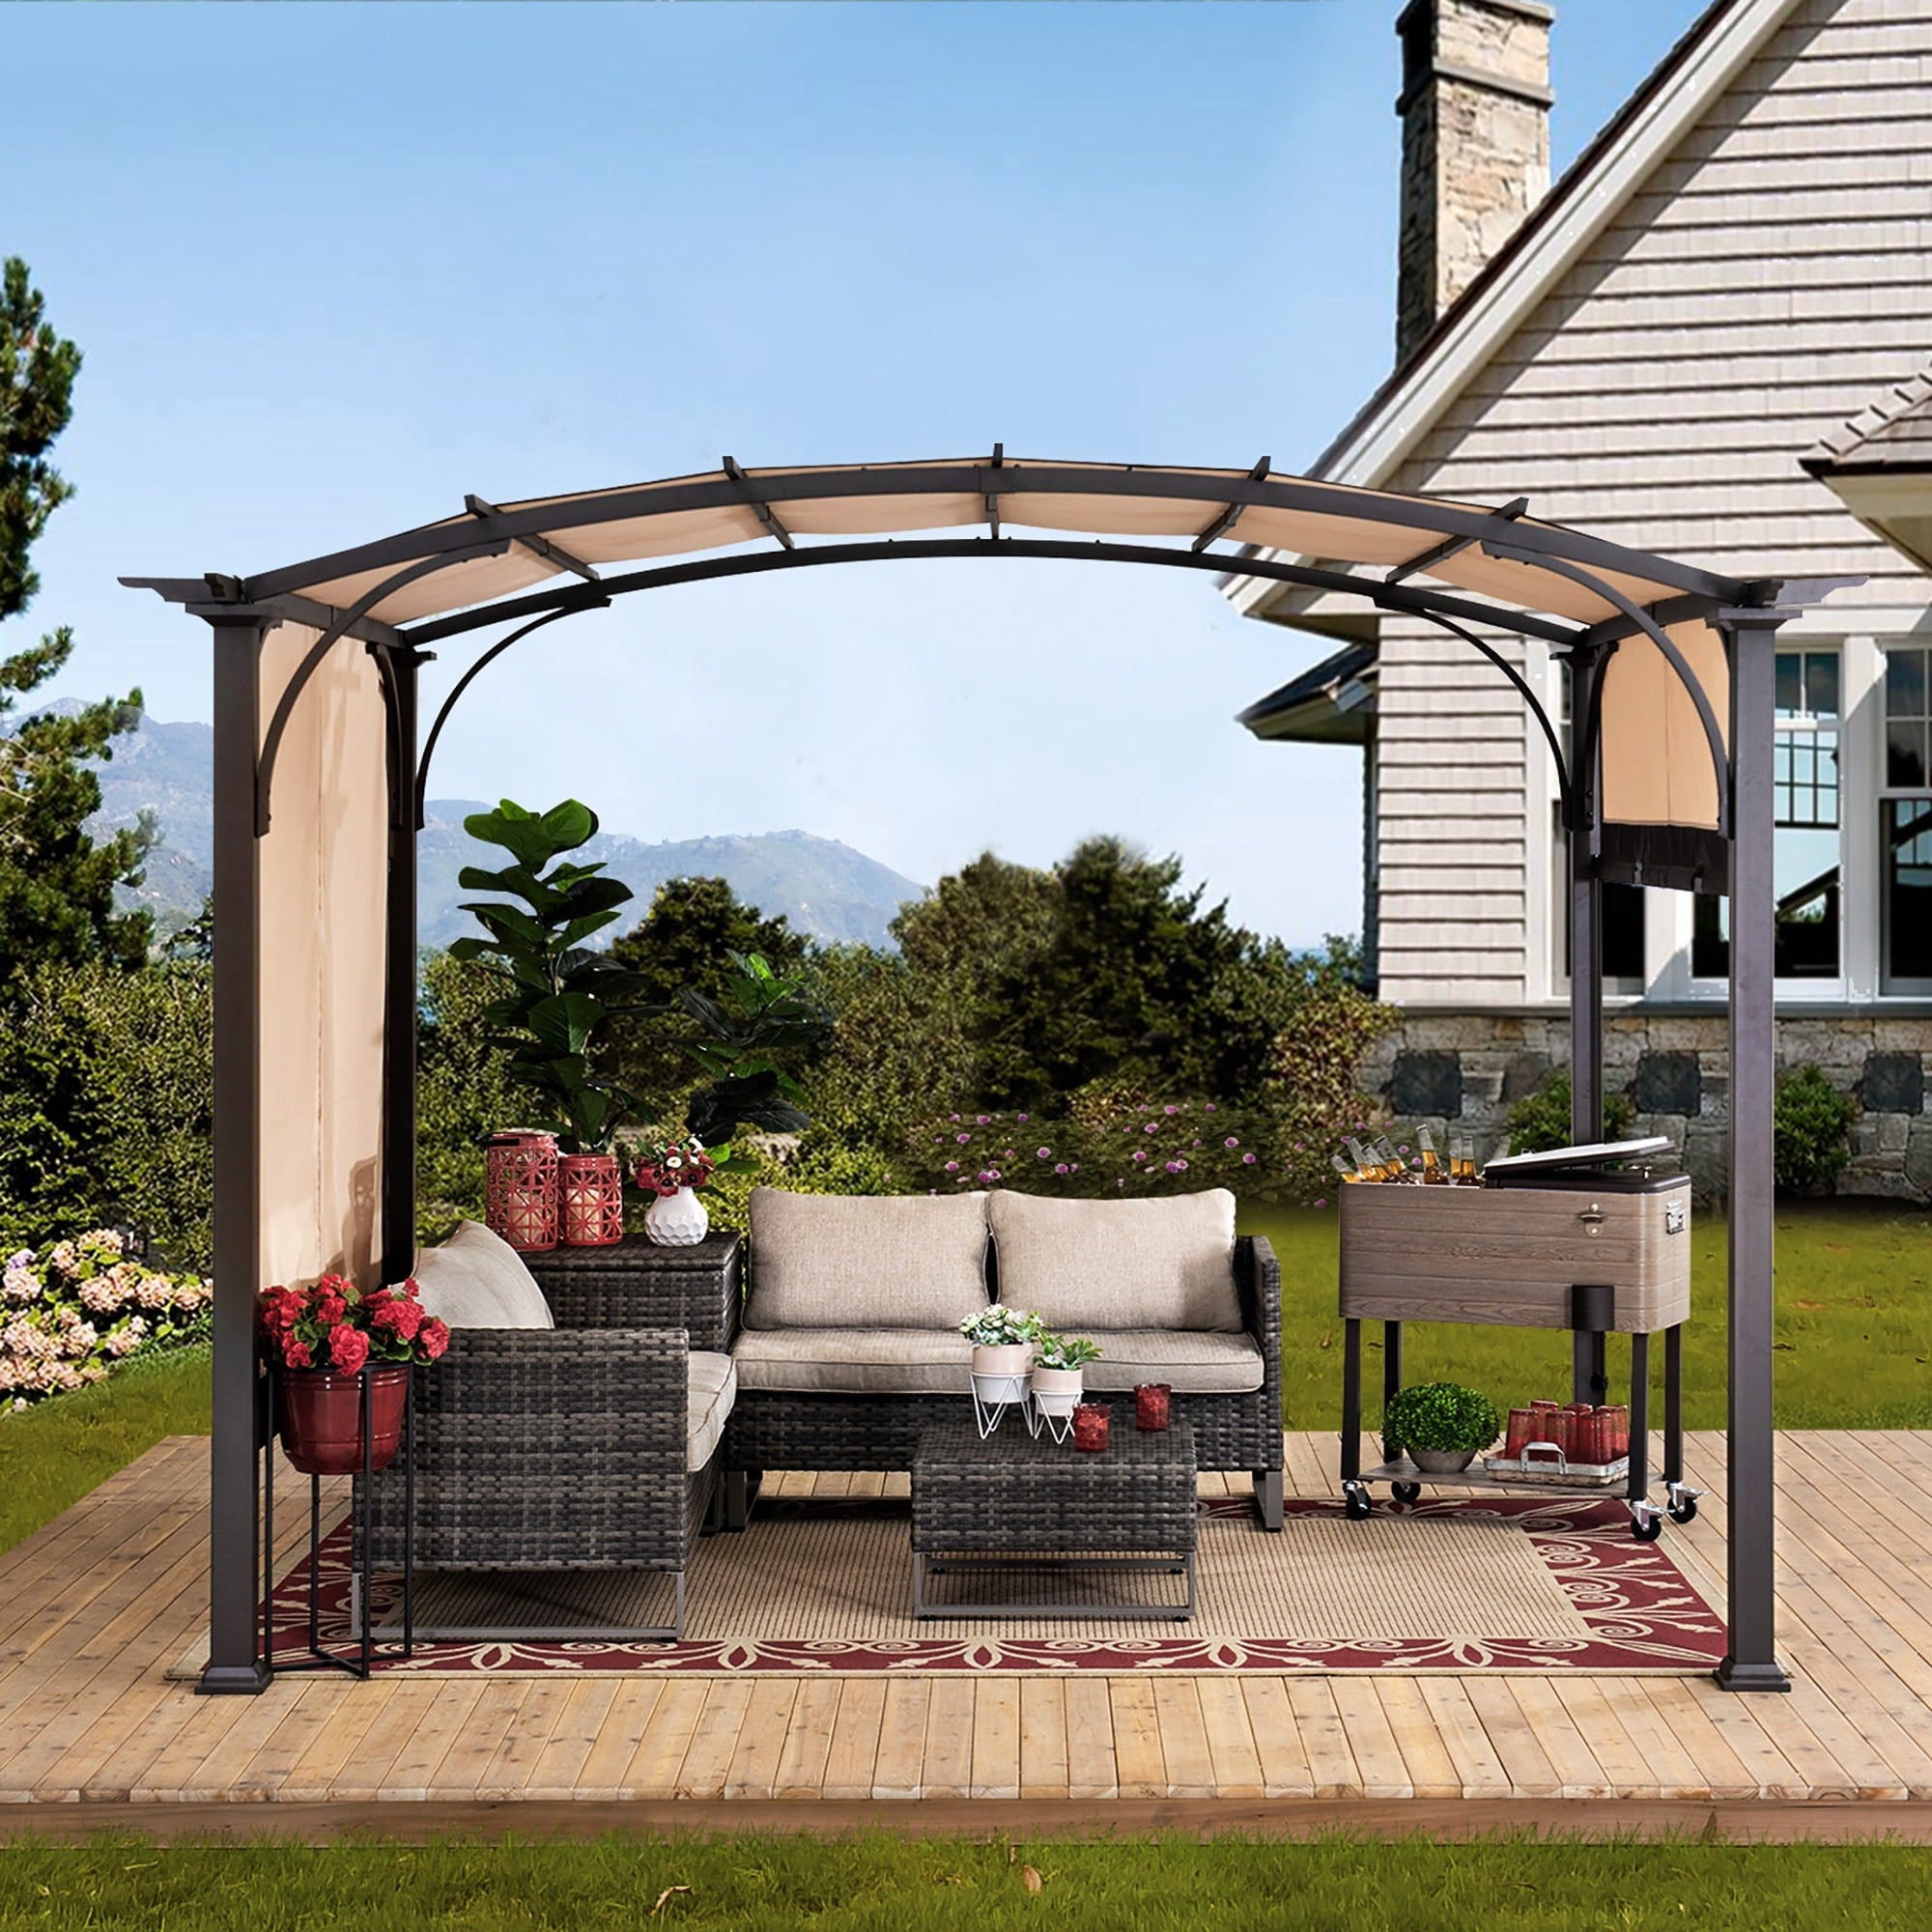 the arched pergola with adjustable shades on either side